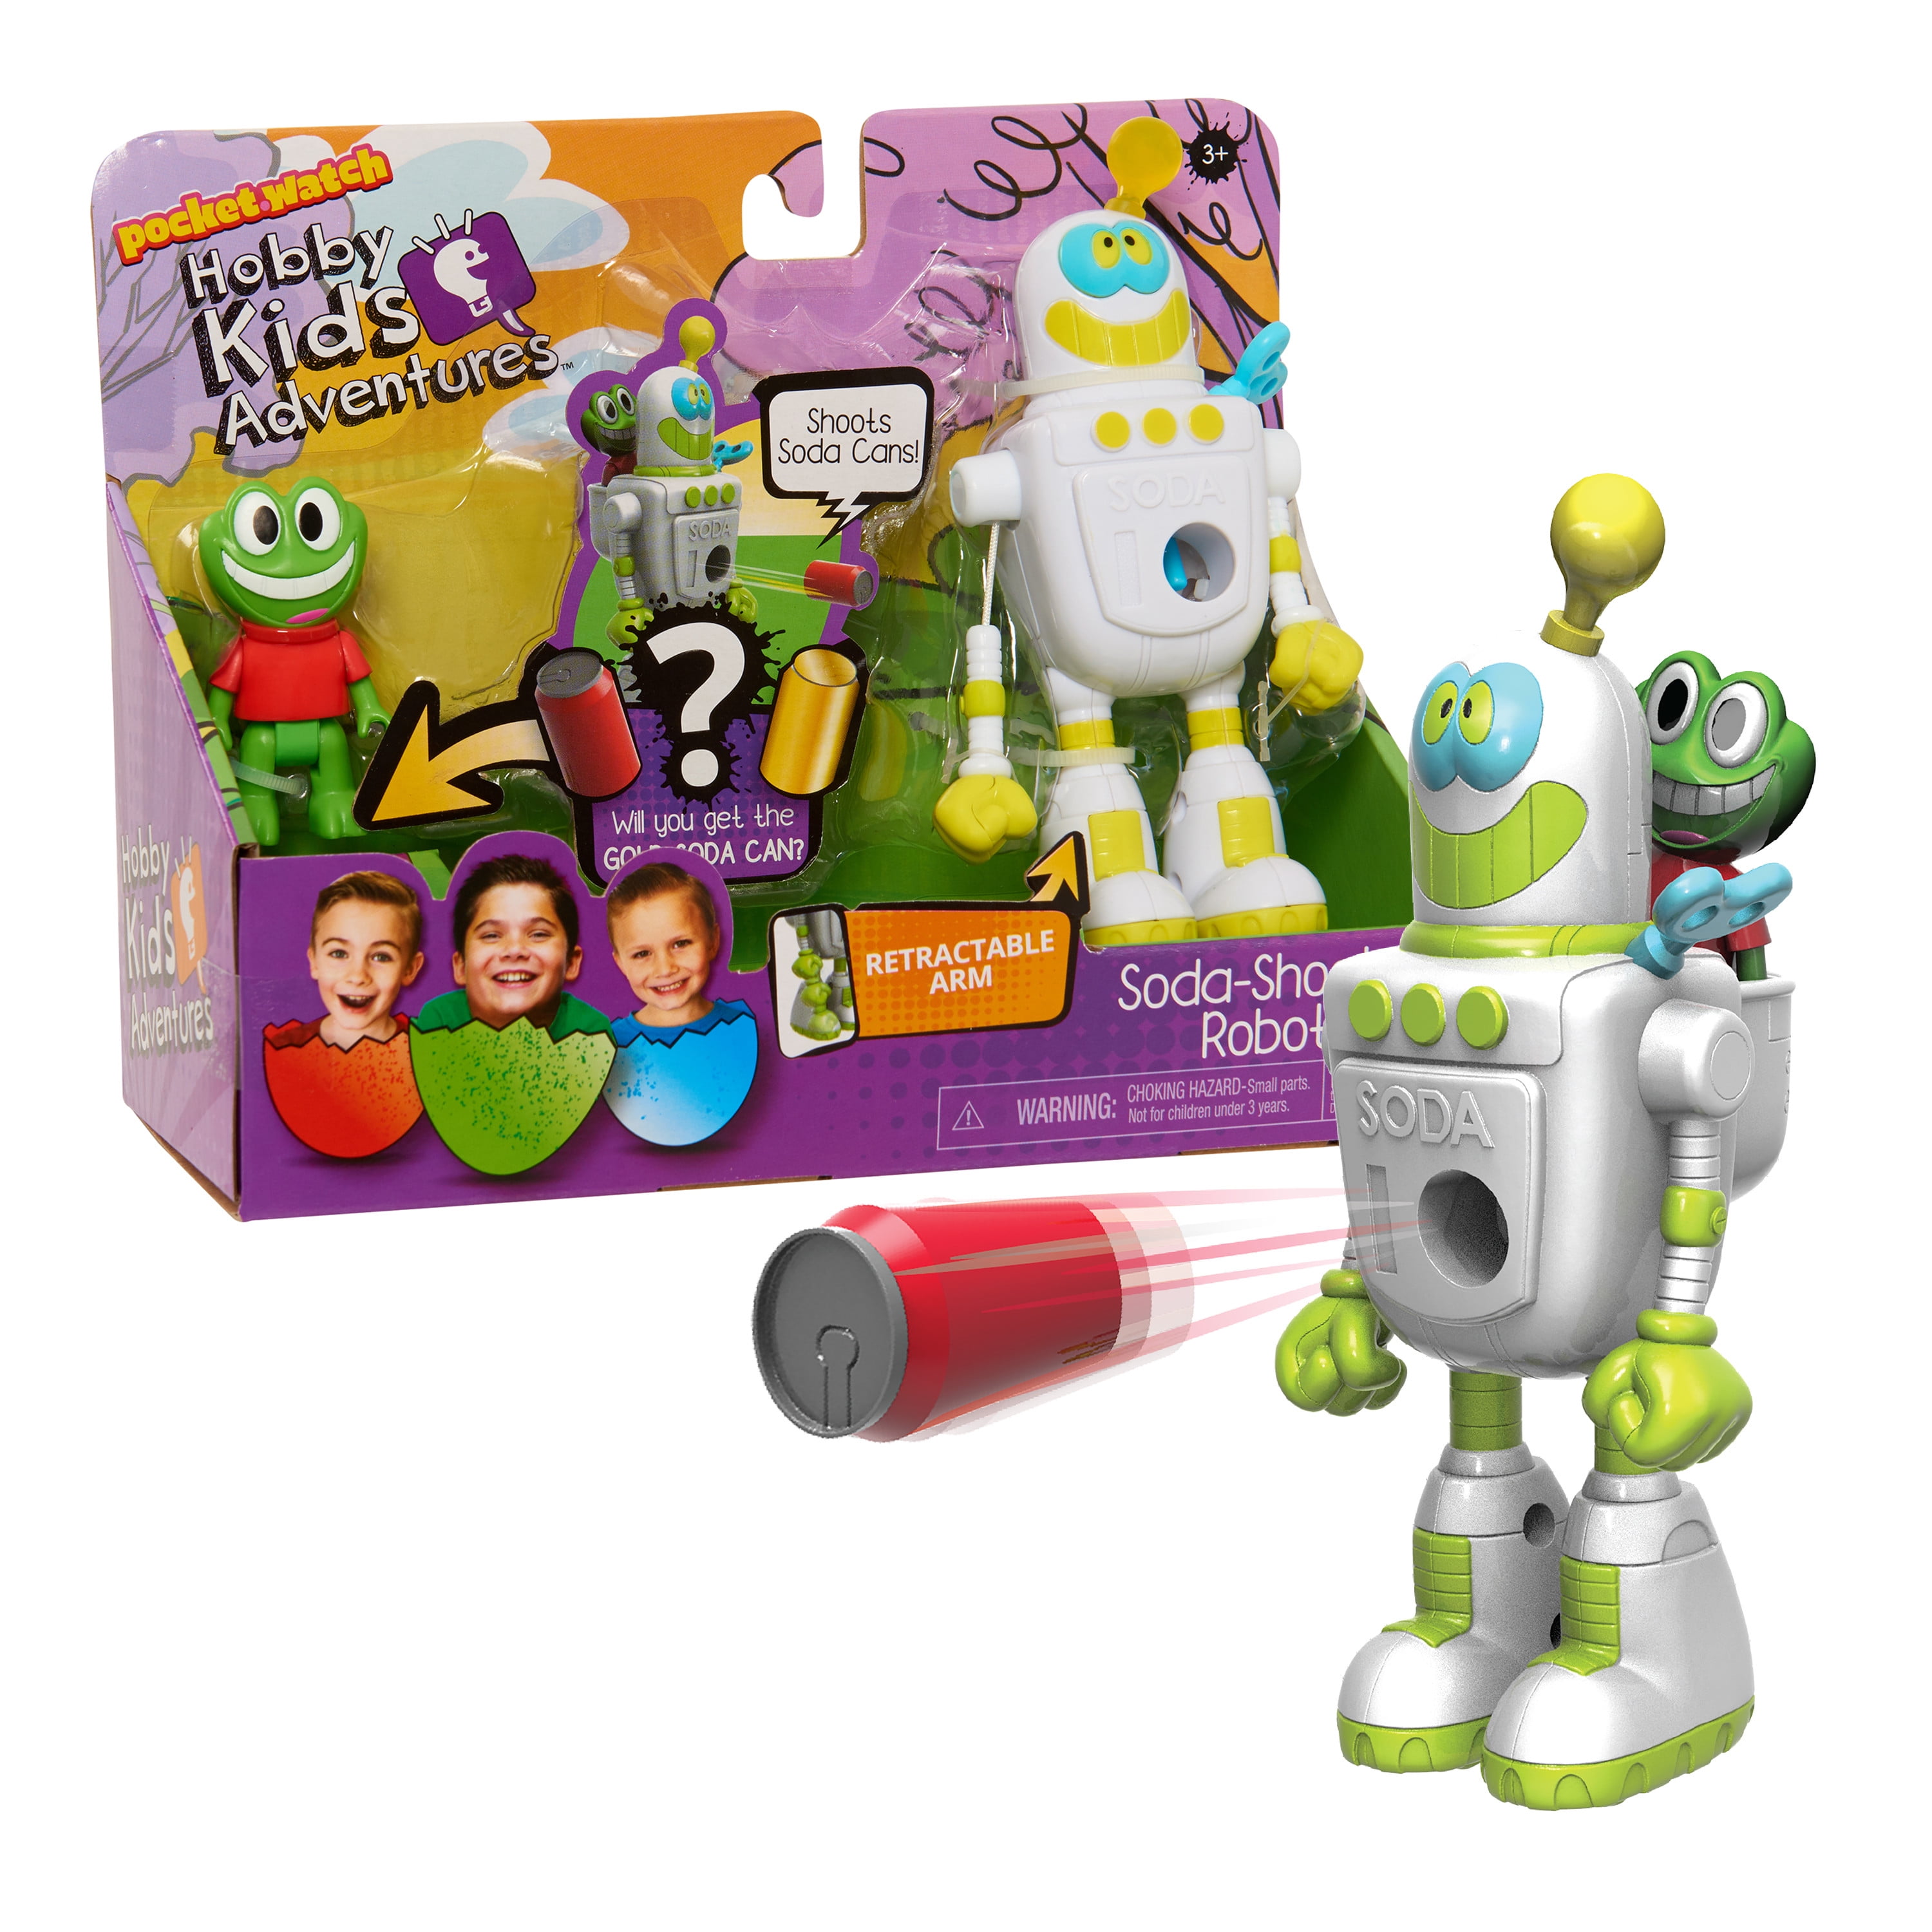 Kerrison Toys - Amazing prices for toys, games and puzzles with